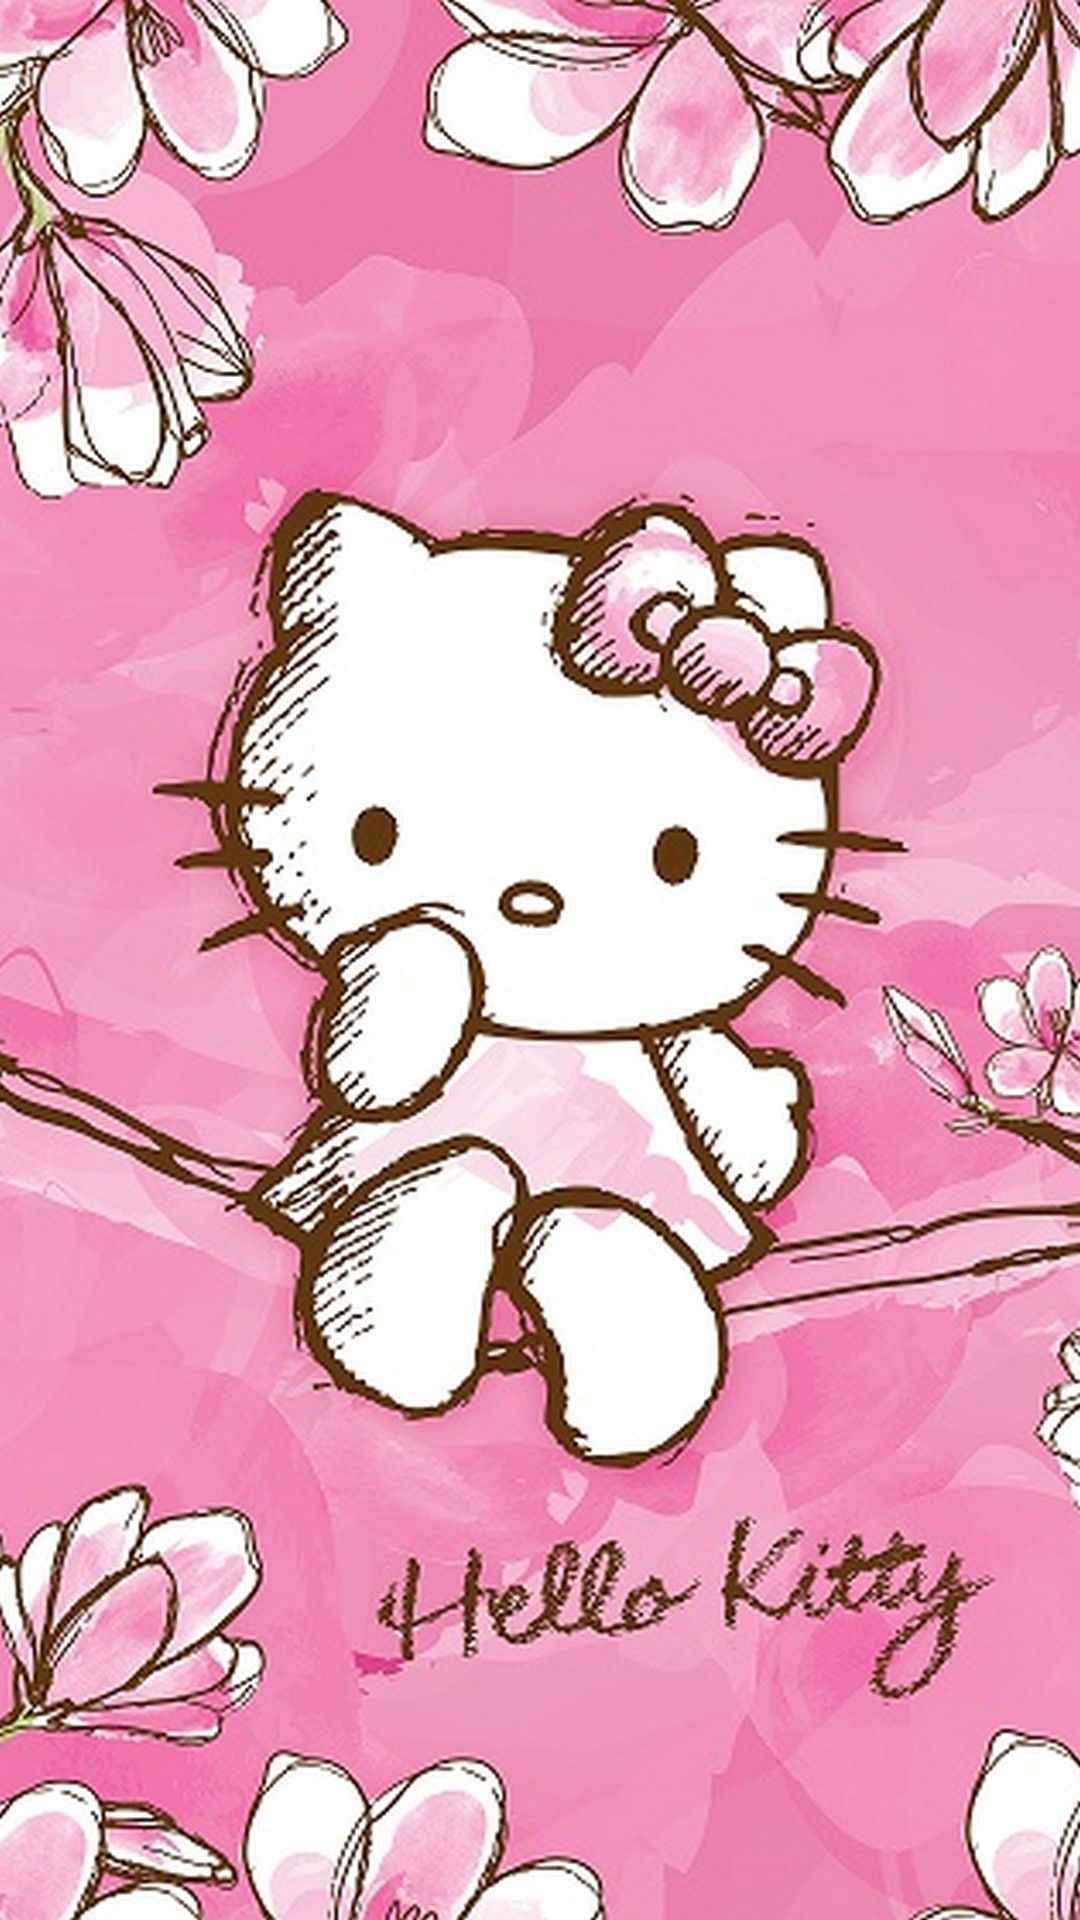 Hello Kitty Wallpaper 1080p Hupages Download iPhone Wallpaper. Hello kitty wallpaper, Hello kitty picture, Hello kitty art